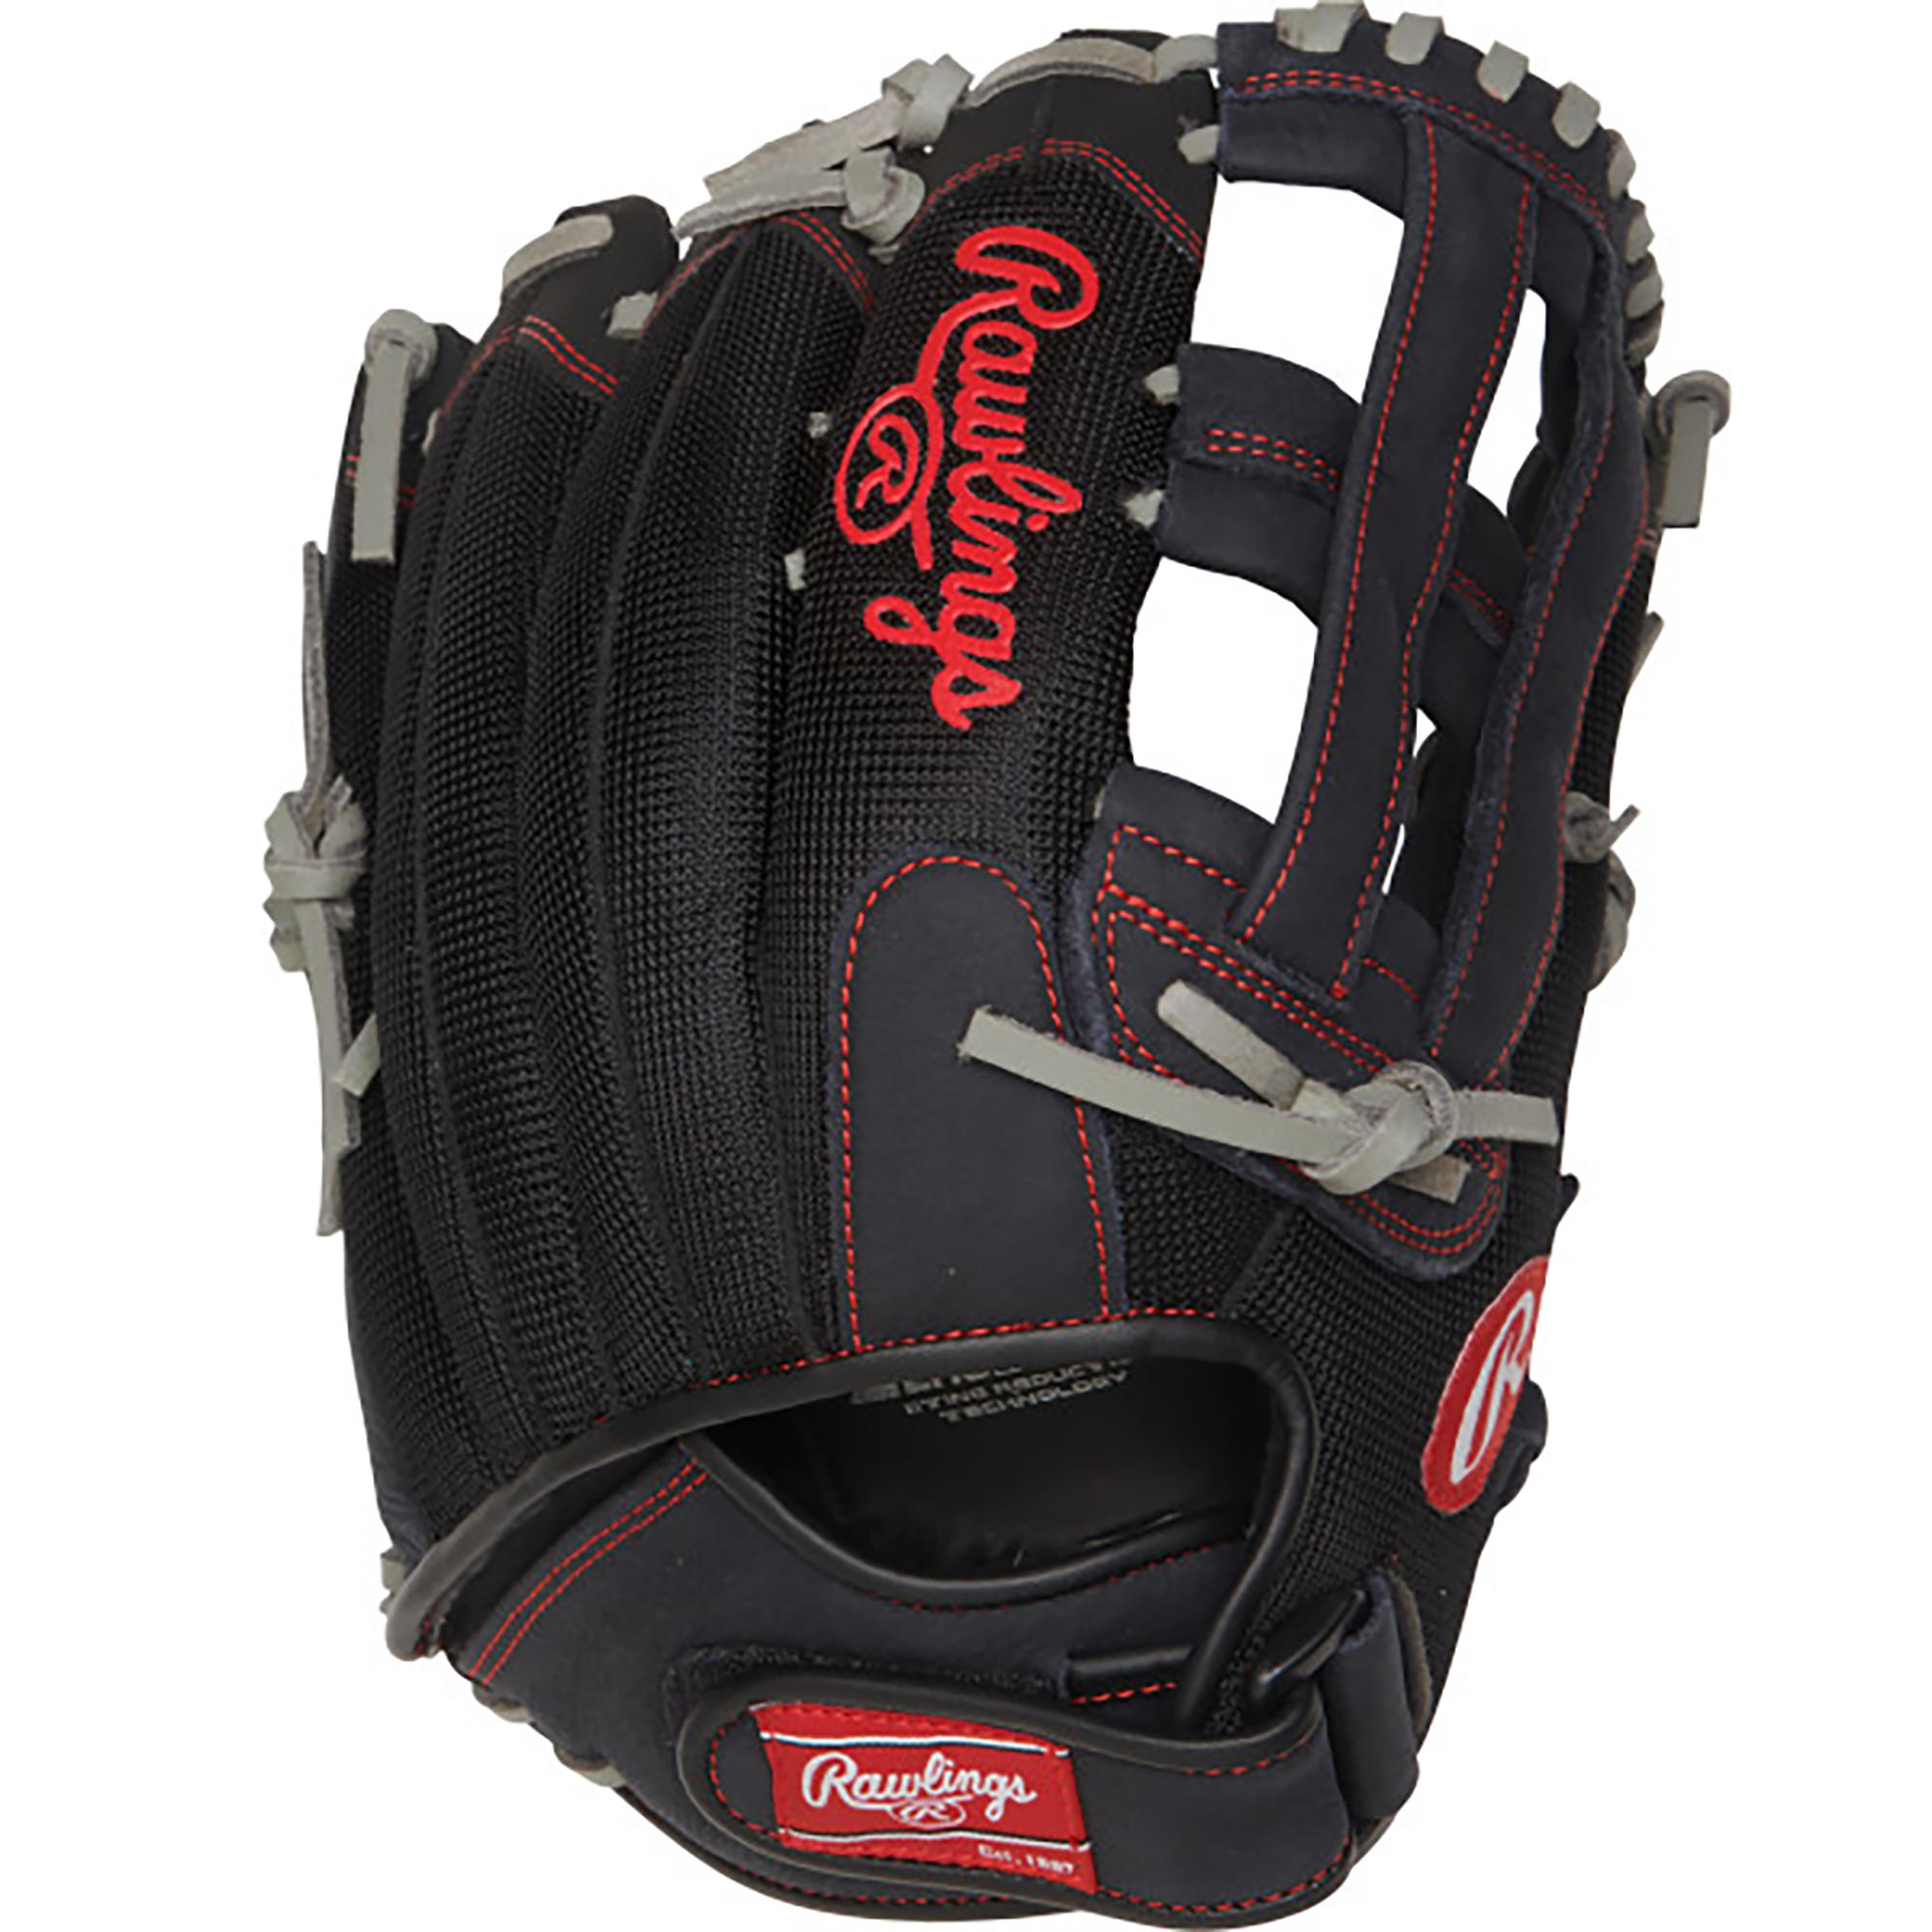 13" H-Web Right-Hand Glove - Renegade - RAWLINGS